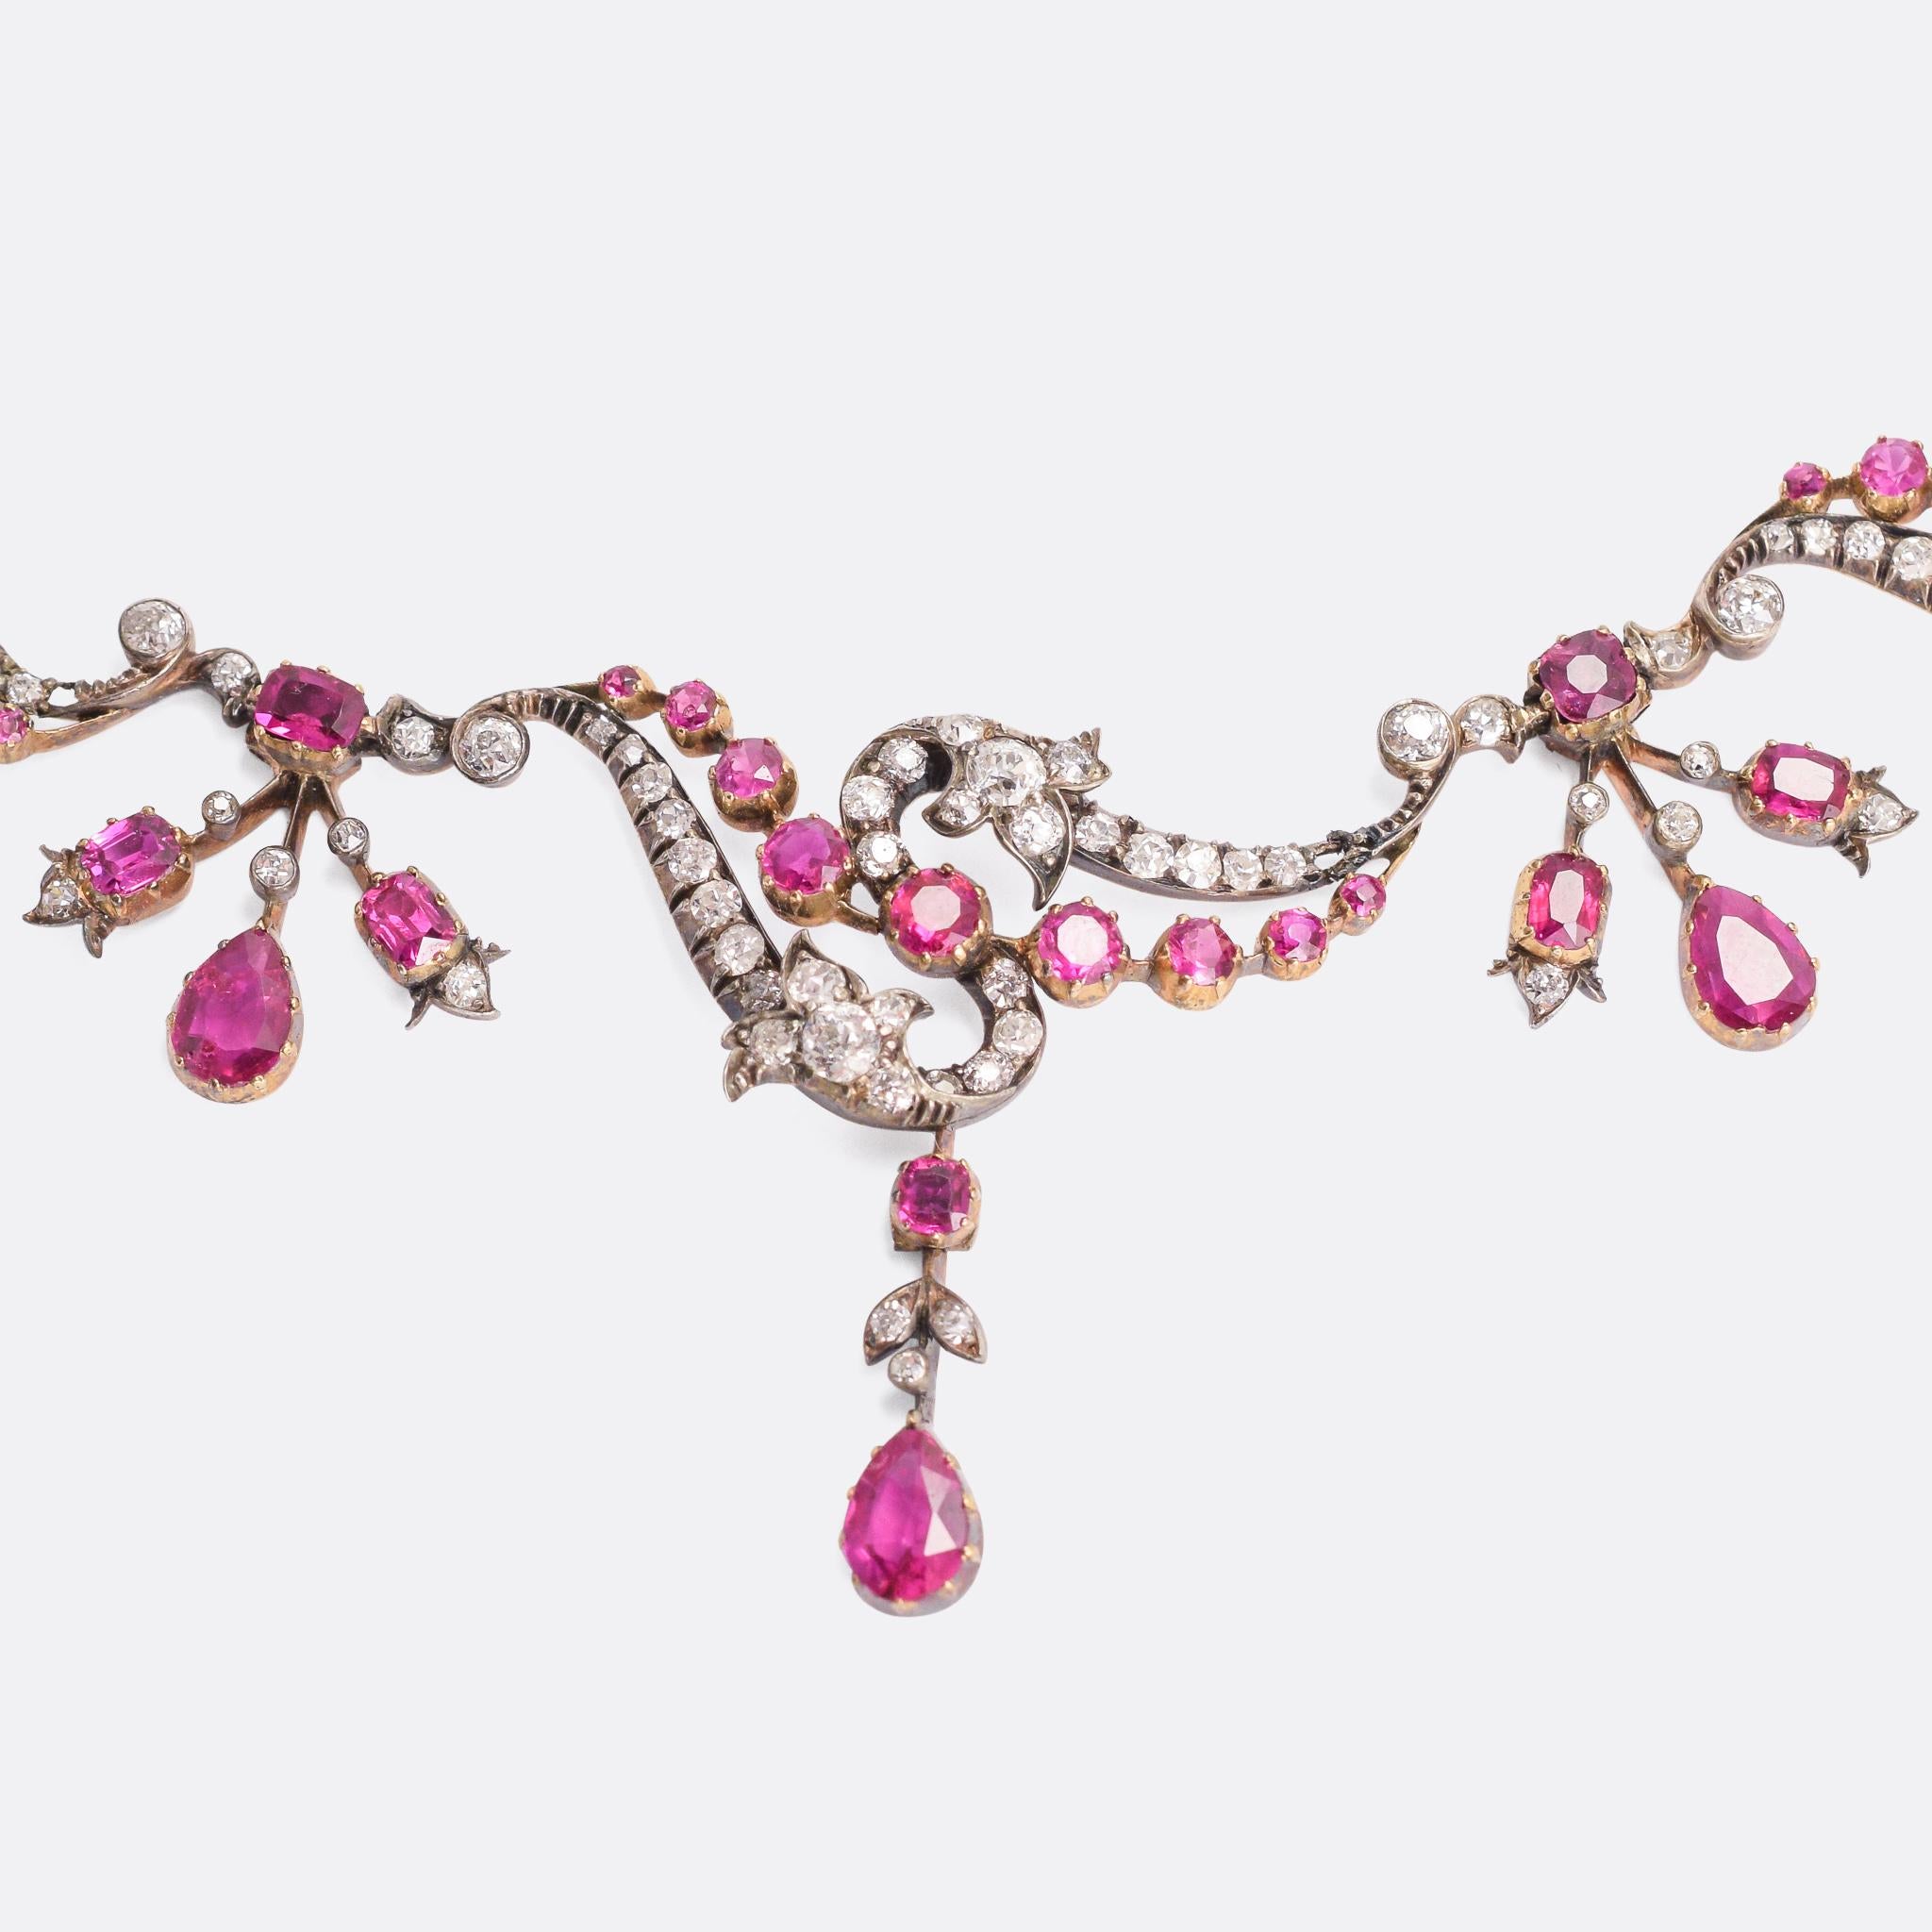 A breathtaking Victorian ruby and diamond necklace in the Rococo Revival style. The design is full of character and life with asymmetrical, organic swirling motifs - the silver settings home to vibrant ruby drops and over three carats of old mine